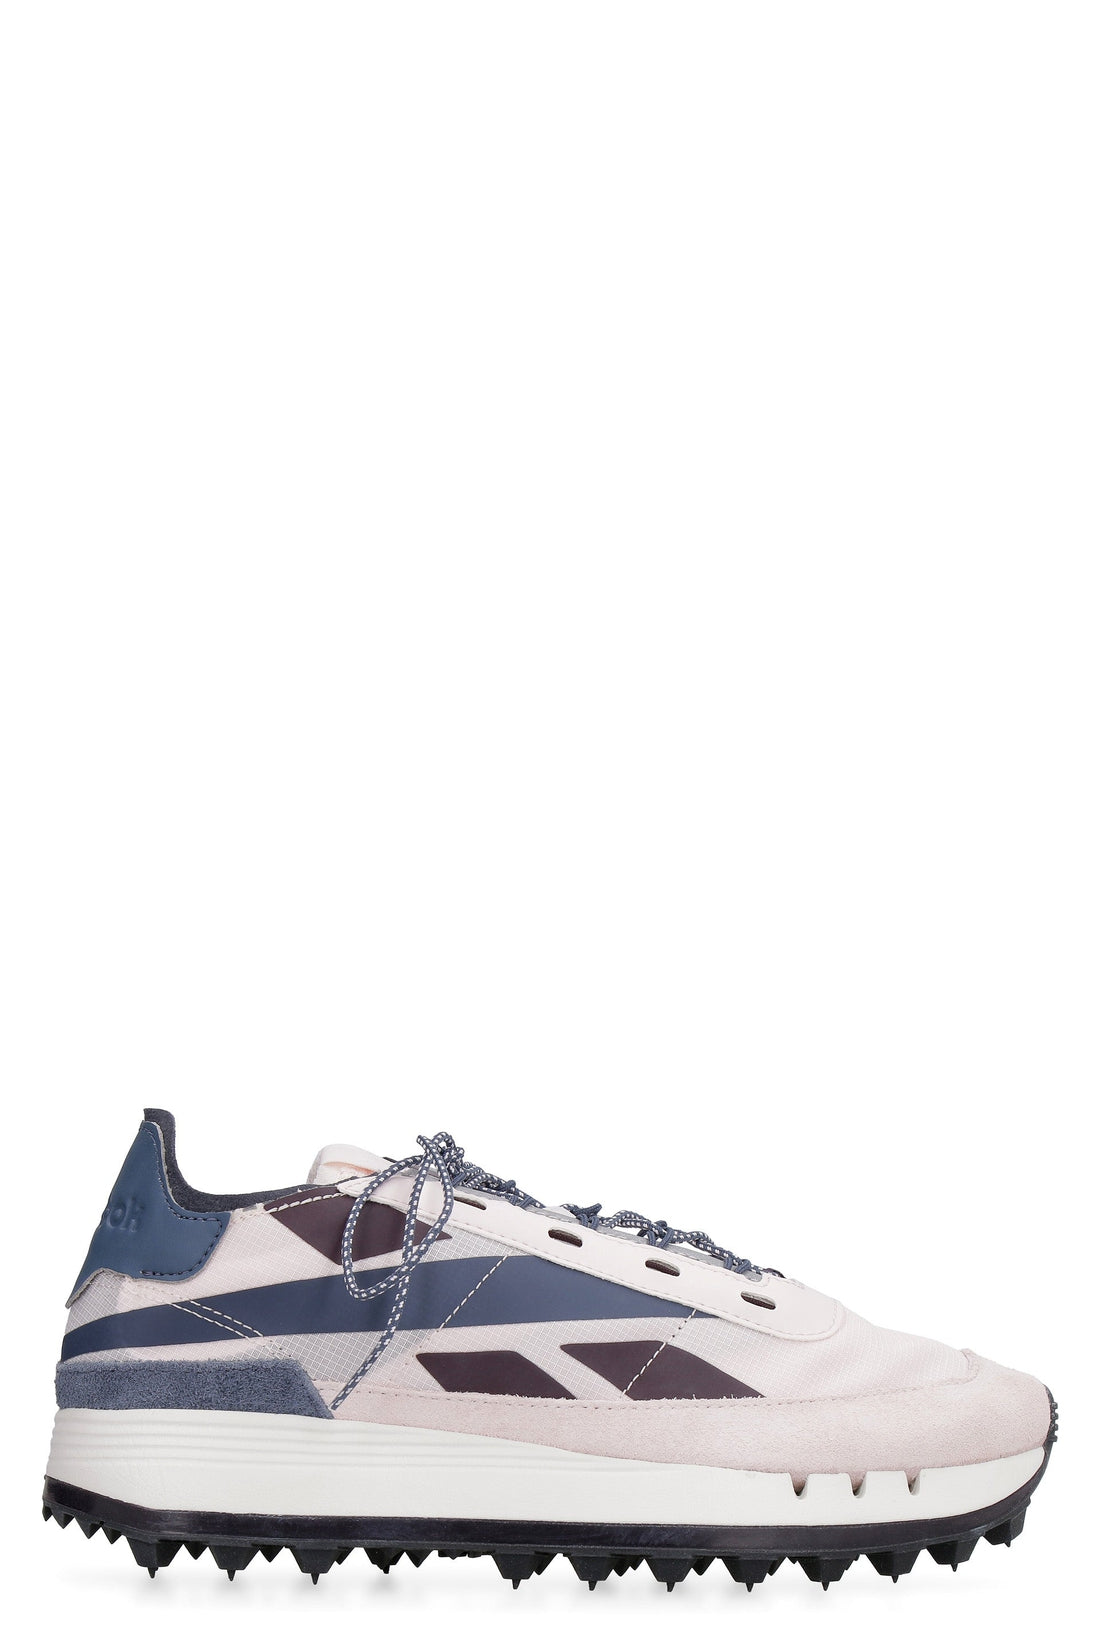 Reebok-OUTLET-SALE-Legacy 83 low-top sneakers-ARCHIVIST